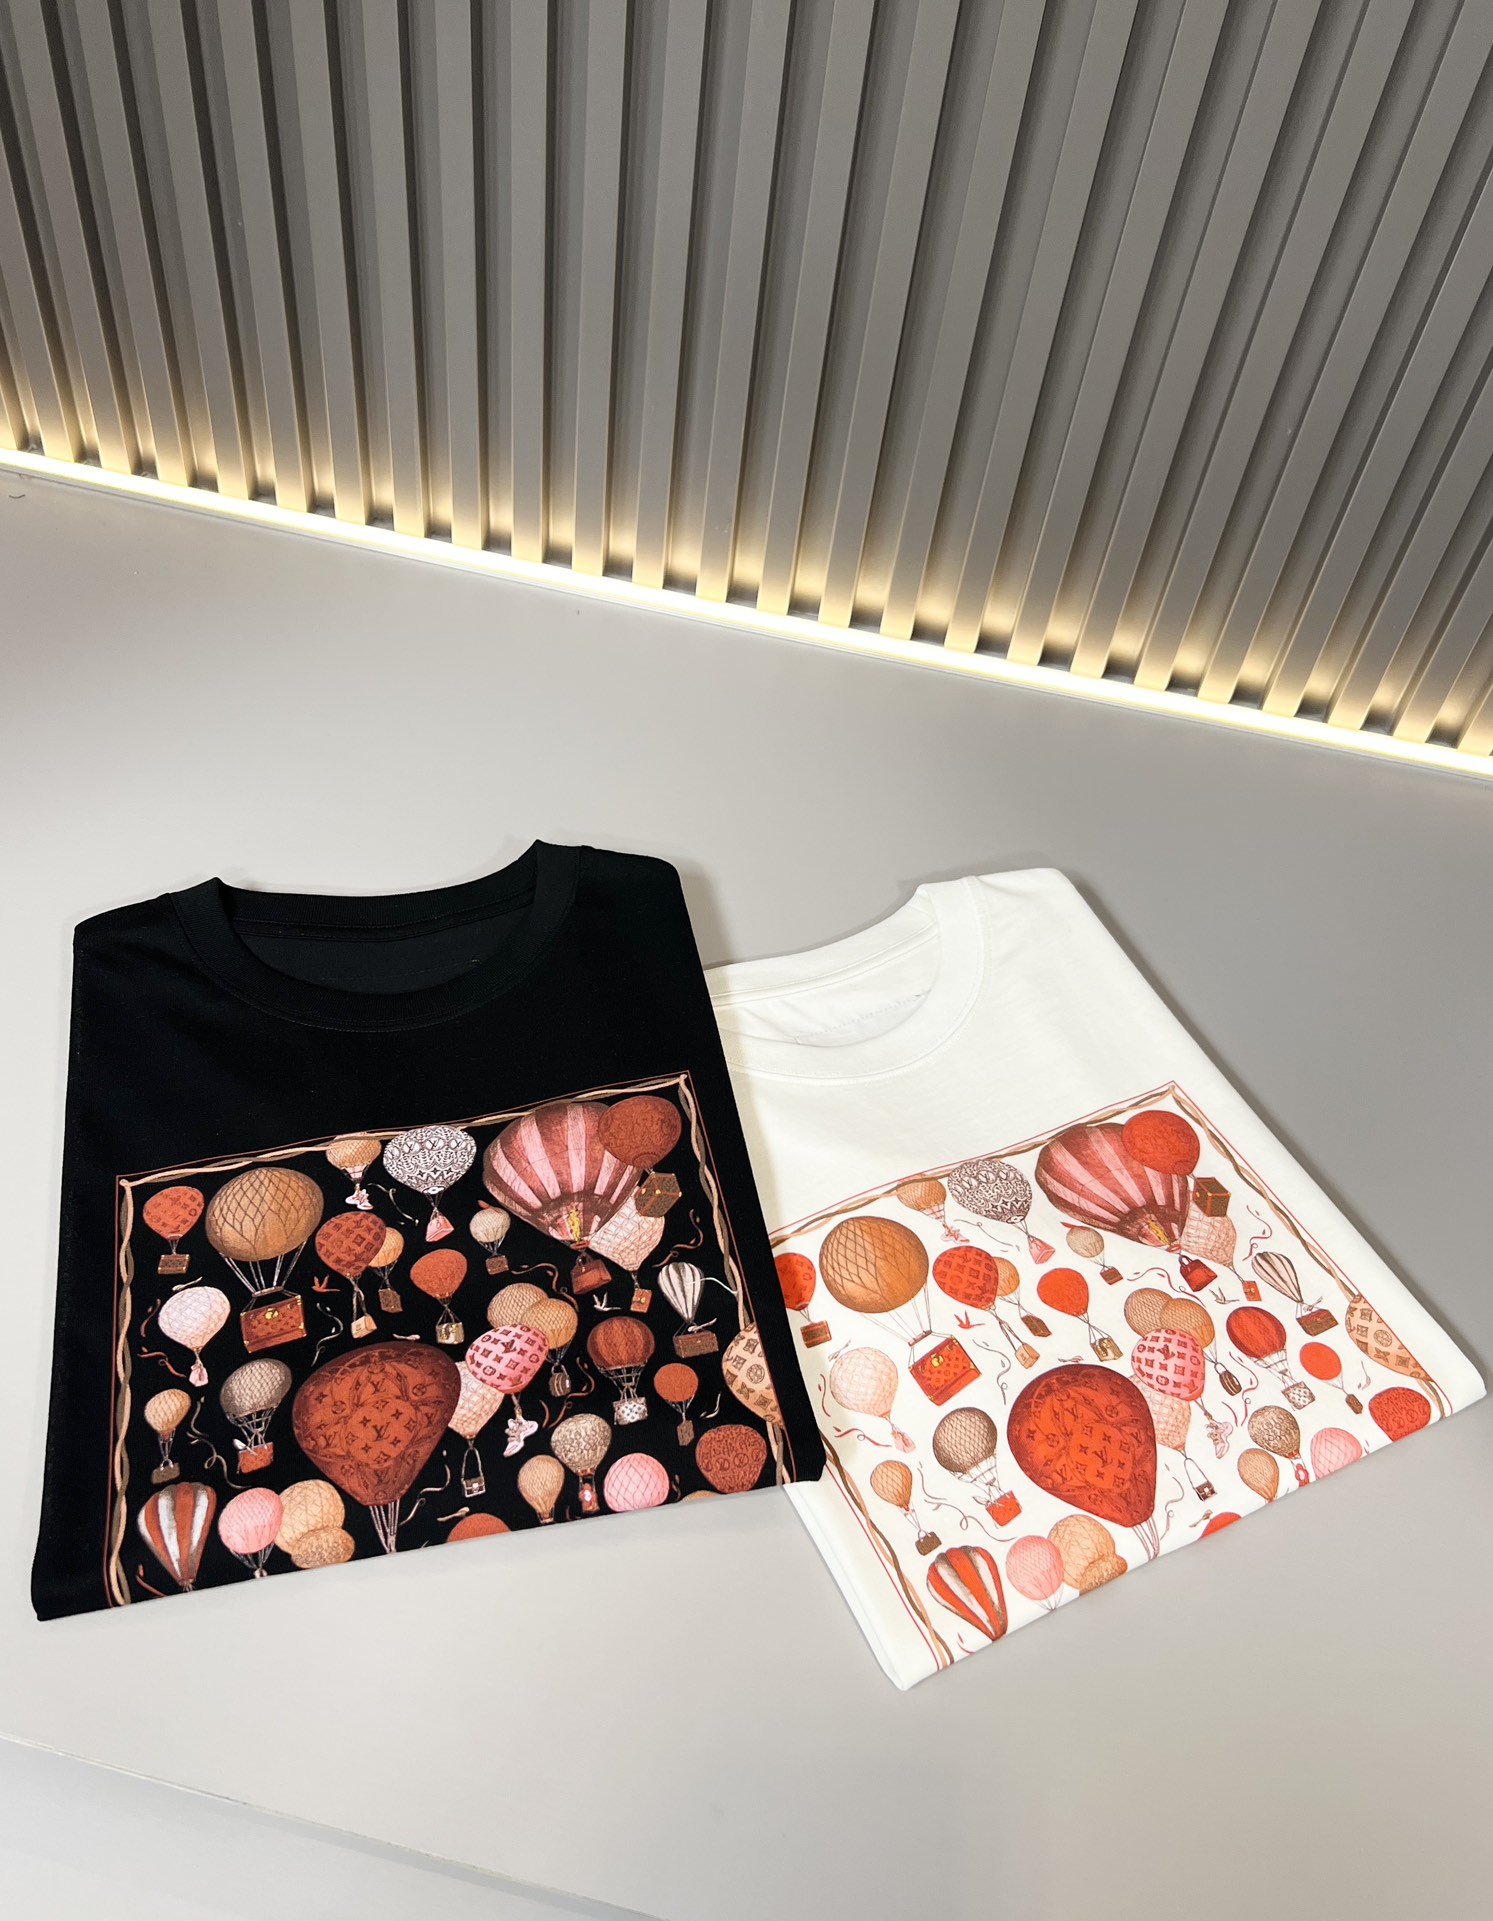 Louis Vuitton Clothing T-Shirt Printing Unisex Cotton Spring/Summer Collection Short Sleeve